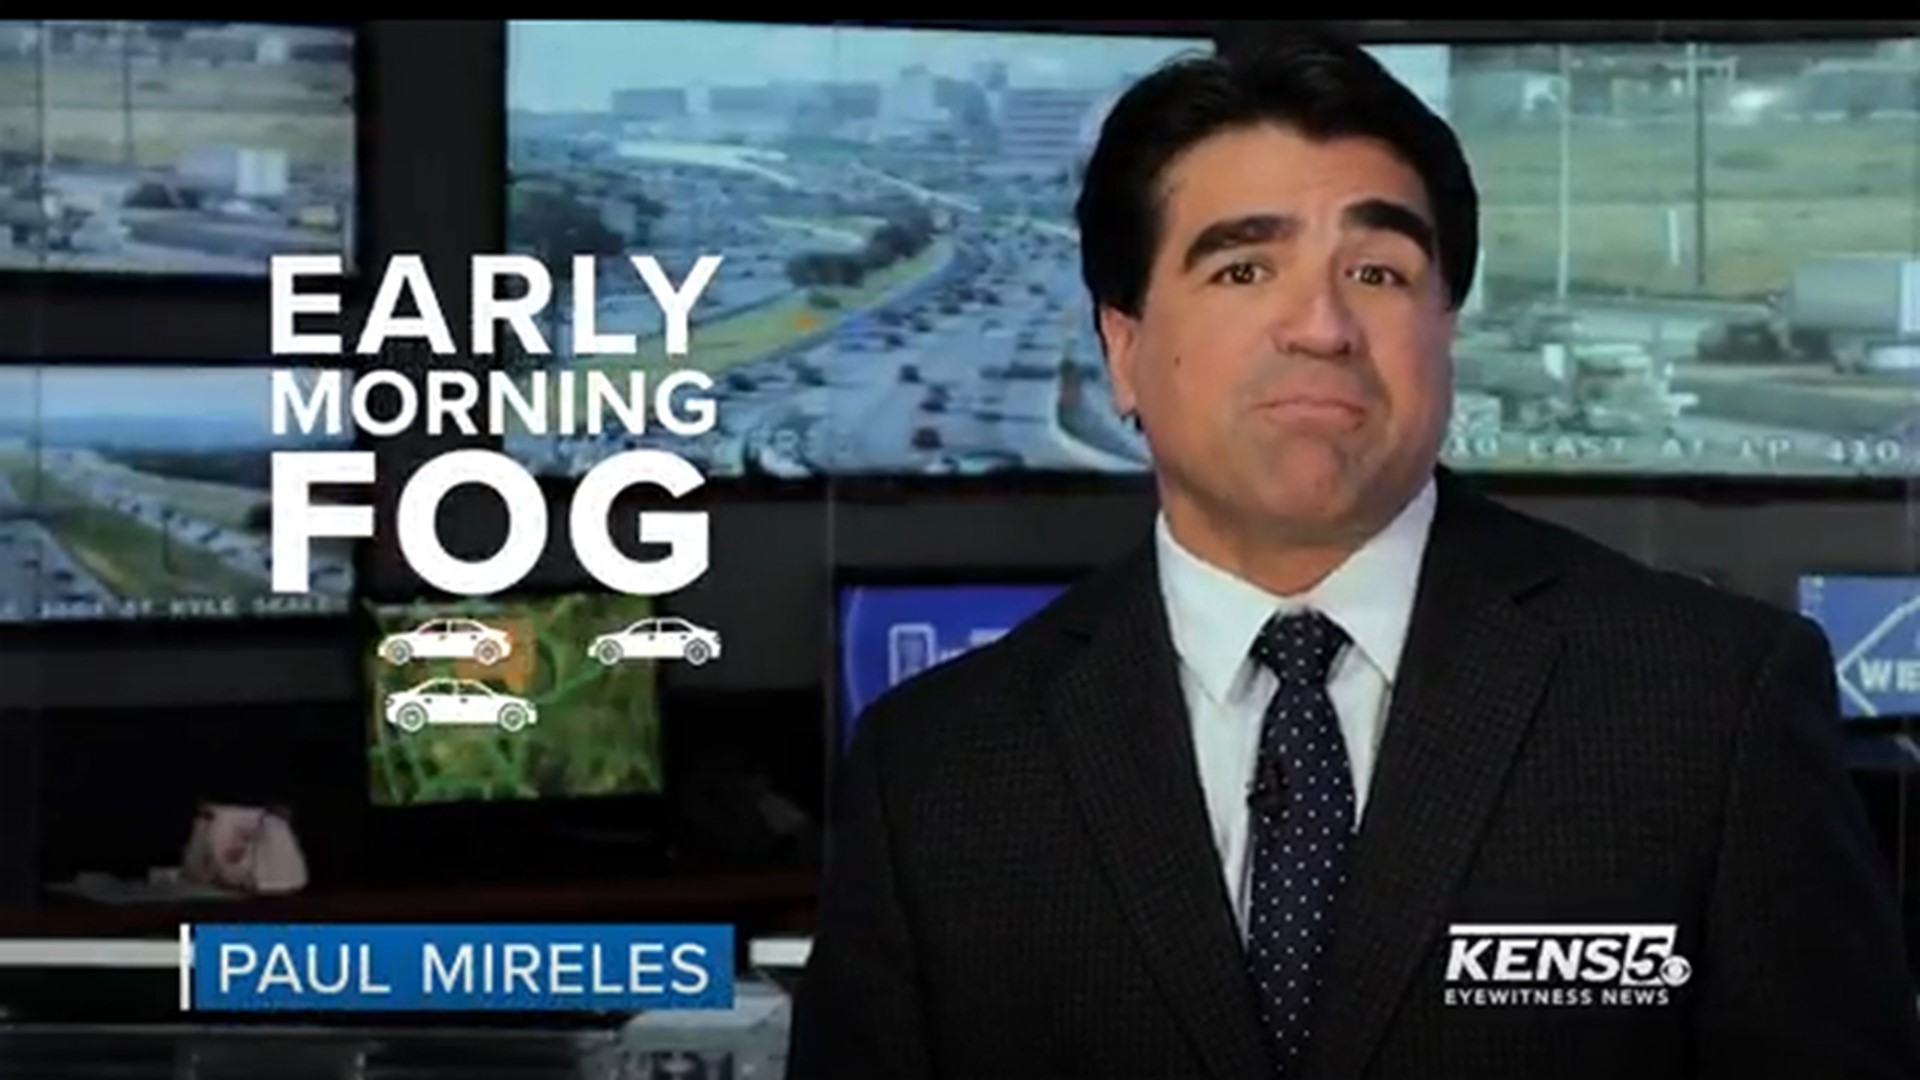 KENS 5's Paul Mireles says early morning driving can be dangerous if you don't slow down in the fog.